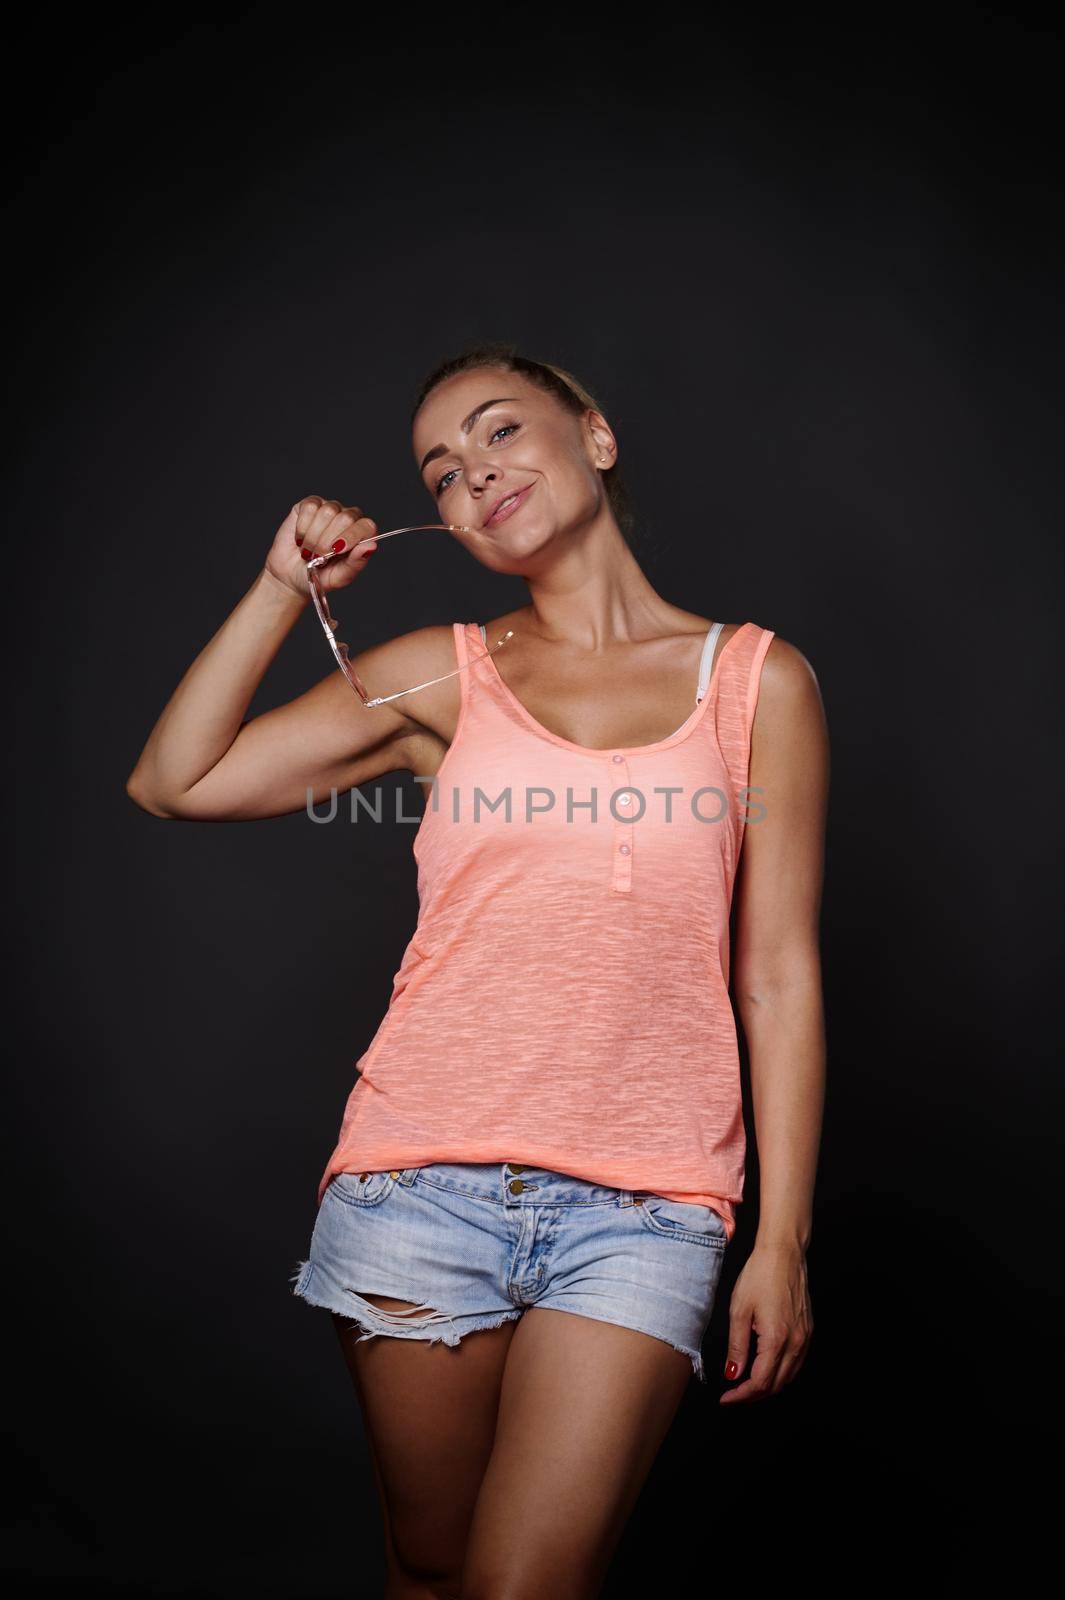 Charming sexy young blonde Caucasian pretty woman with tanned skin, aesthetic fit body in denim shorts, pink top and sunglasses posing over black background with copy ad space by artgf